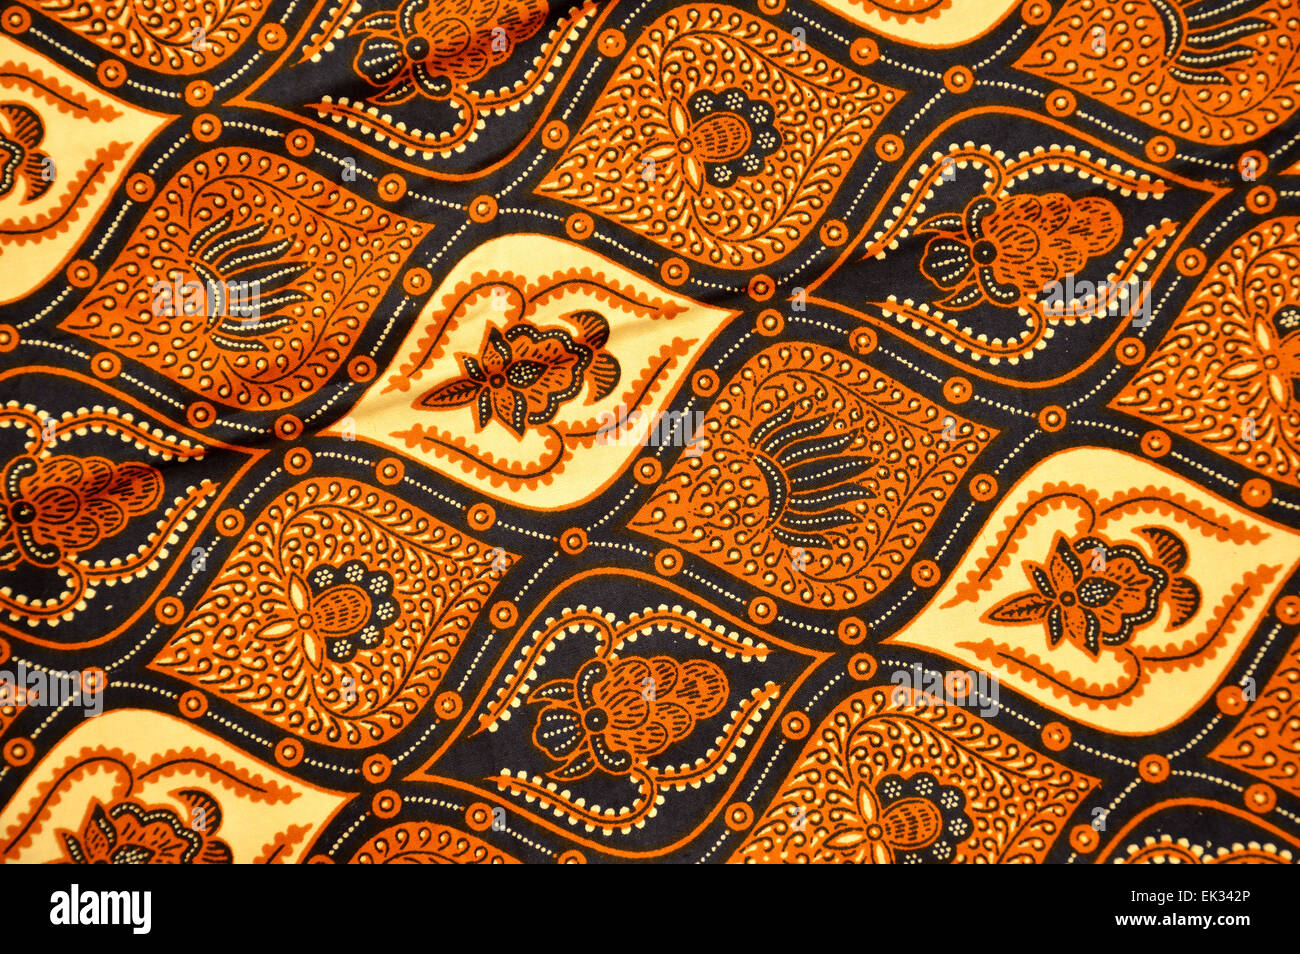 detailed patterns of Indonesia  batik  cloth Stock Photo 